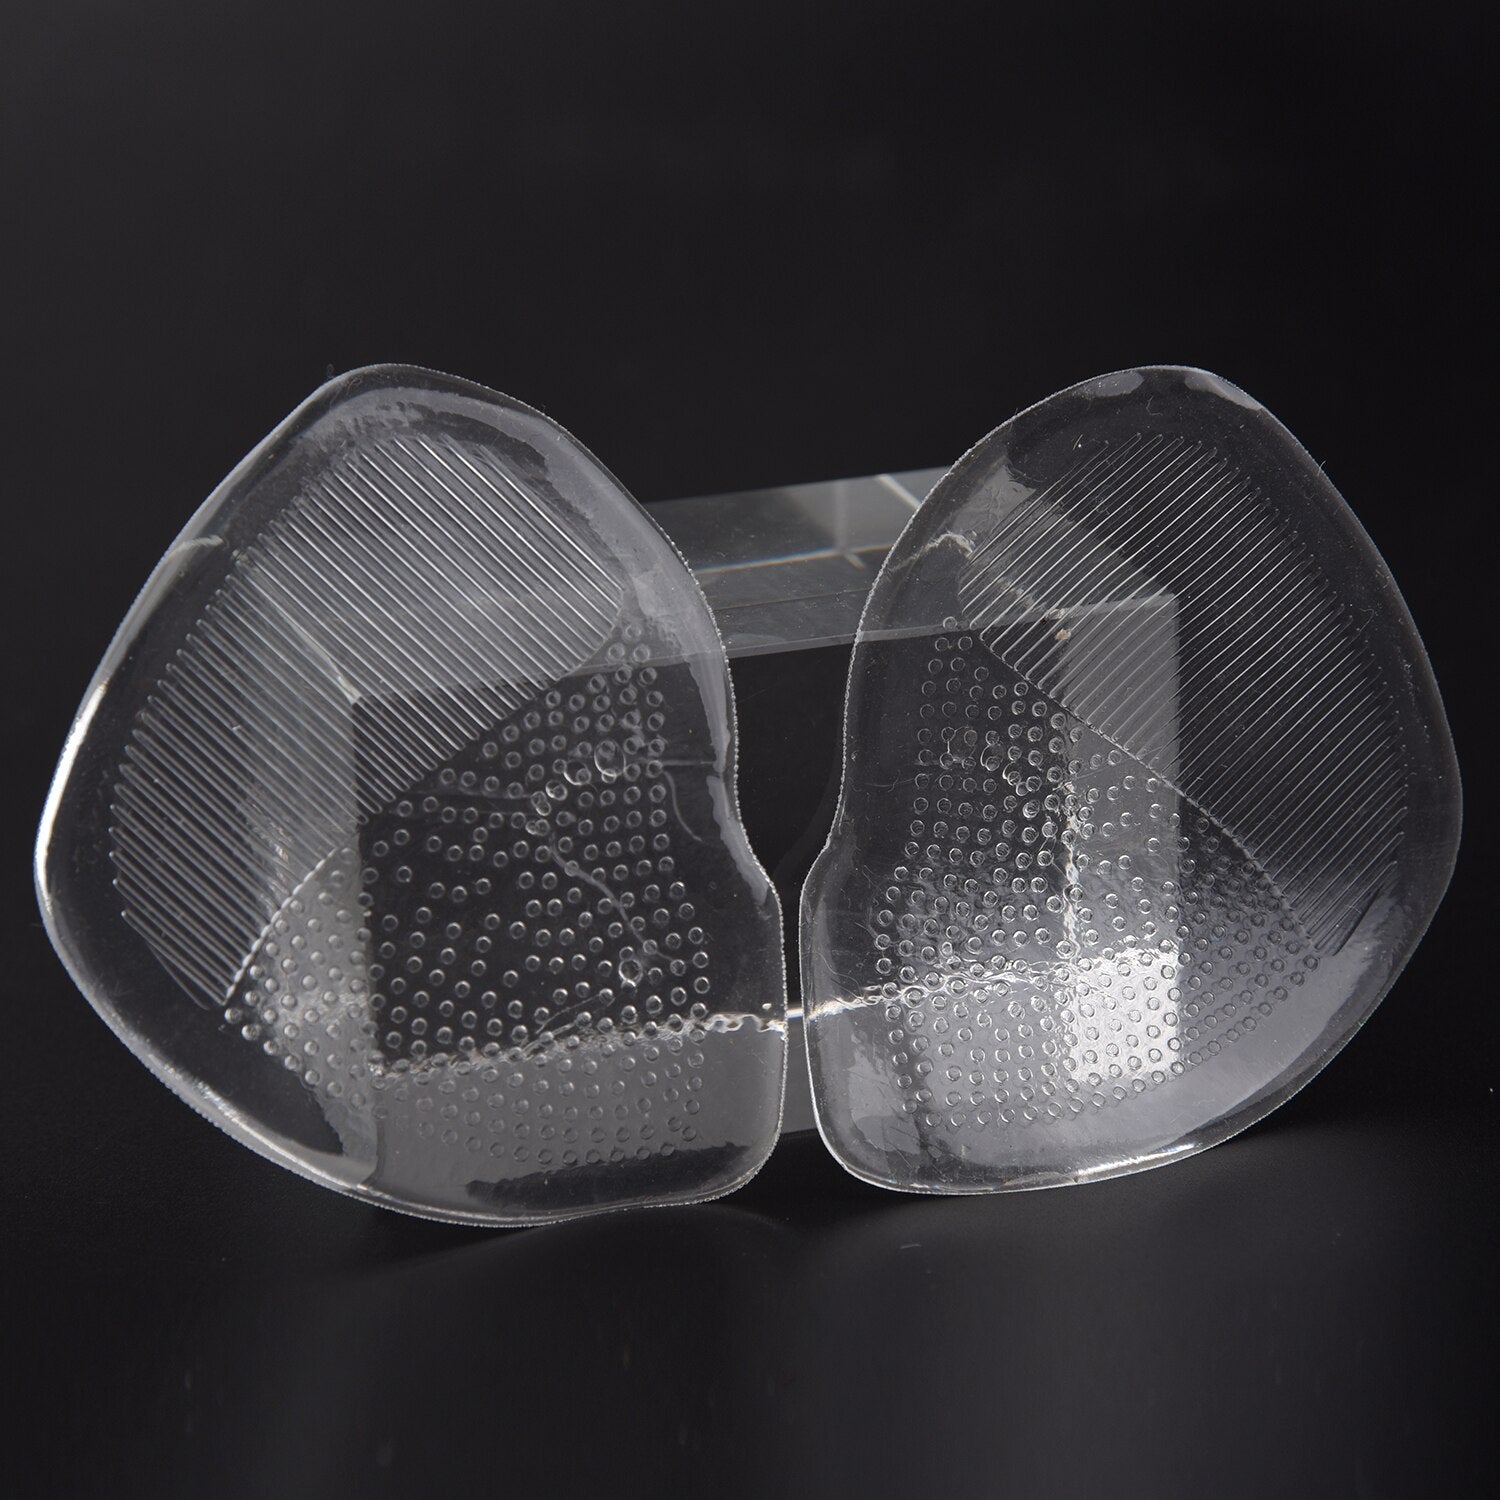 Hot-Clear Antislip Soft Silicone Ball Of Foot High Heel Shoes Cushion Metatarsal Pad - ebowsos